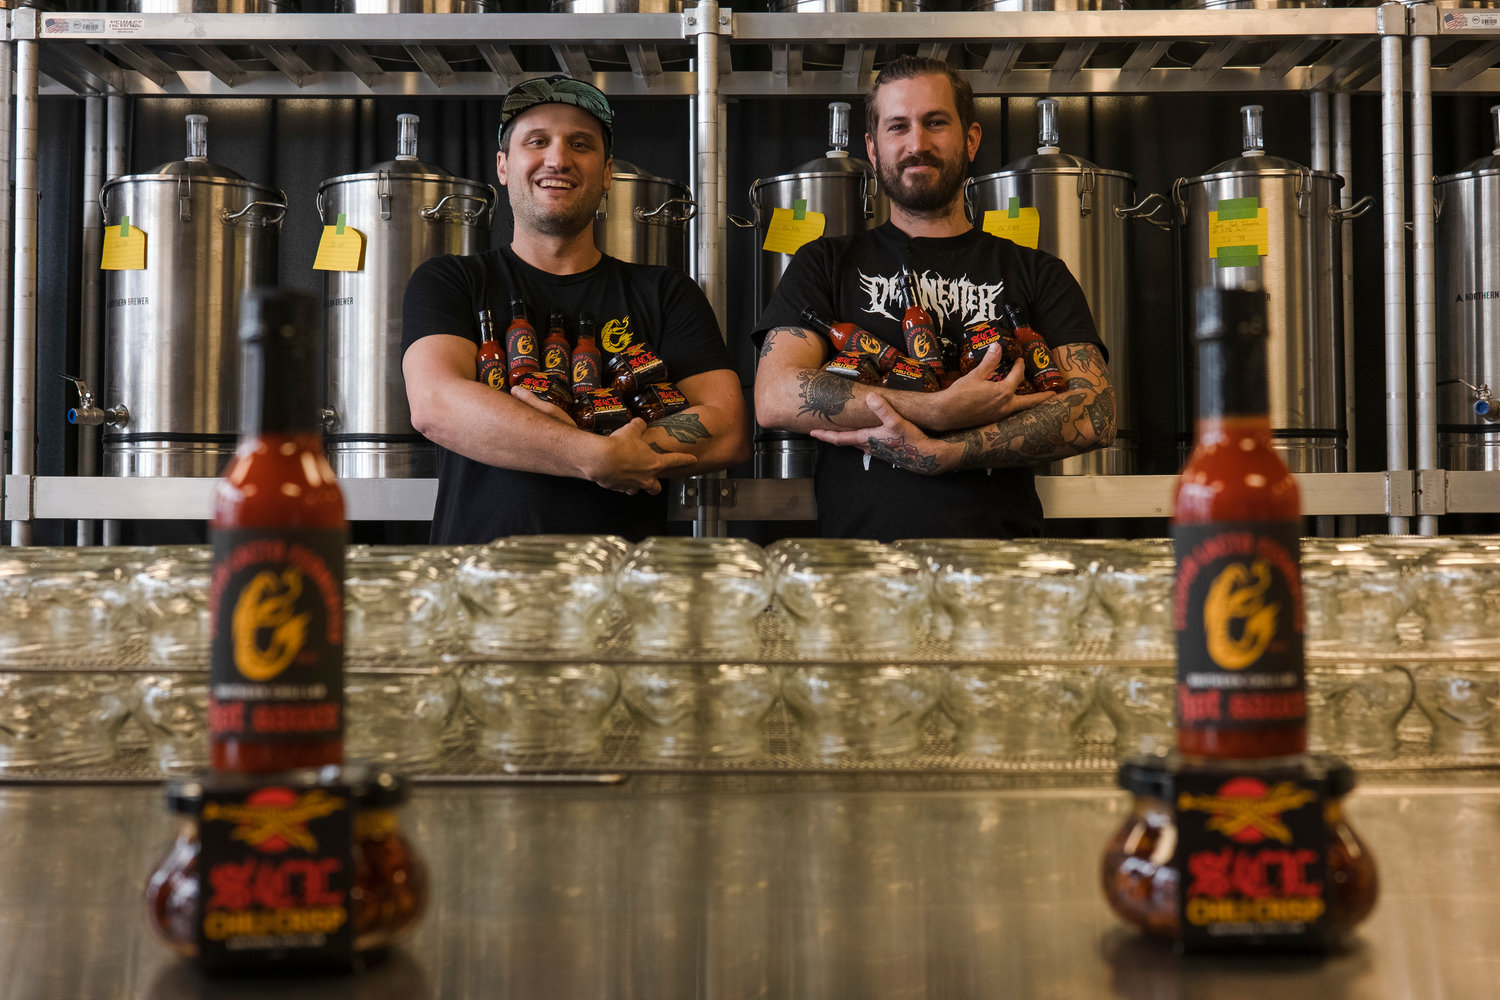 Jonathan Kastner and Tyler Braun have left the restaurant business to manufacture their own hot sauce and chili crisp.